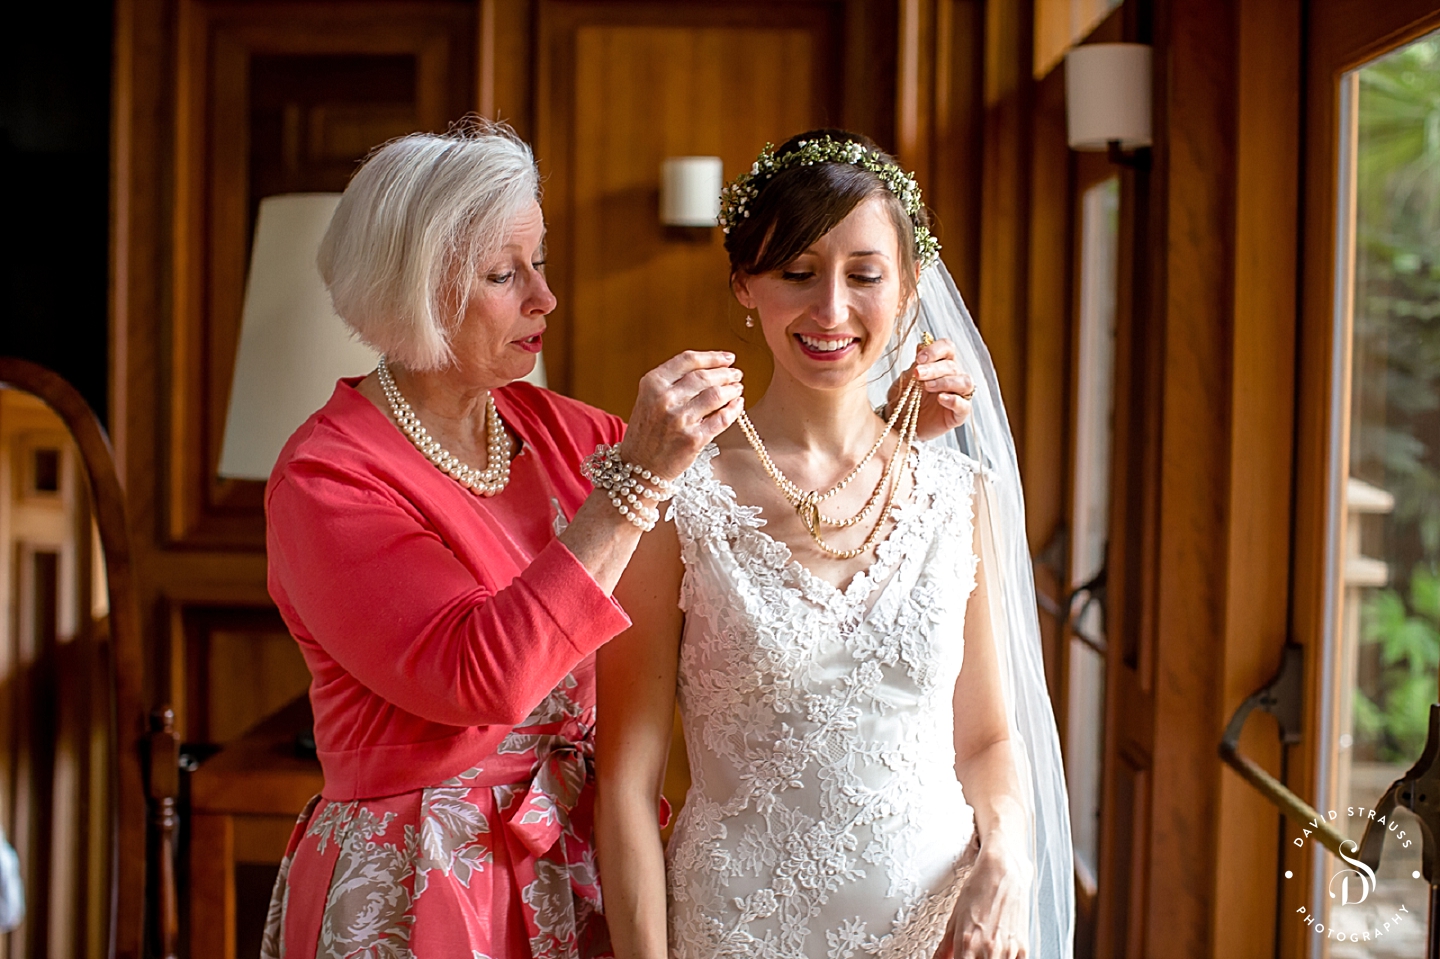 Mother Daughter Jewelry - Charleston Wedding Photography - Hannah and Chris